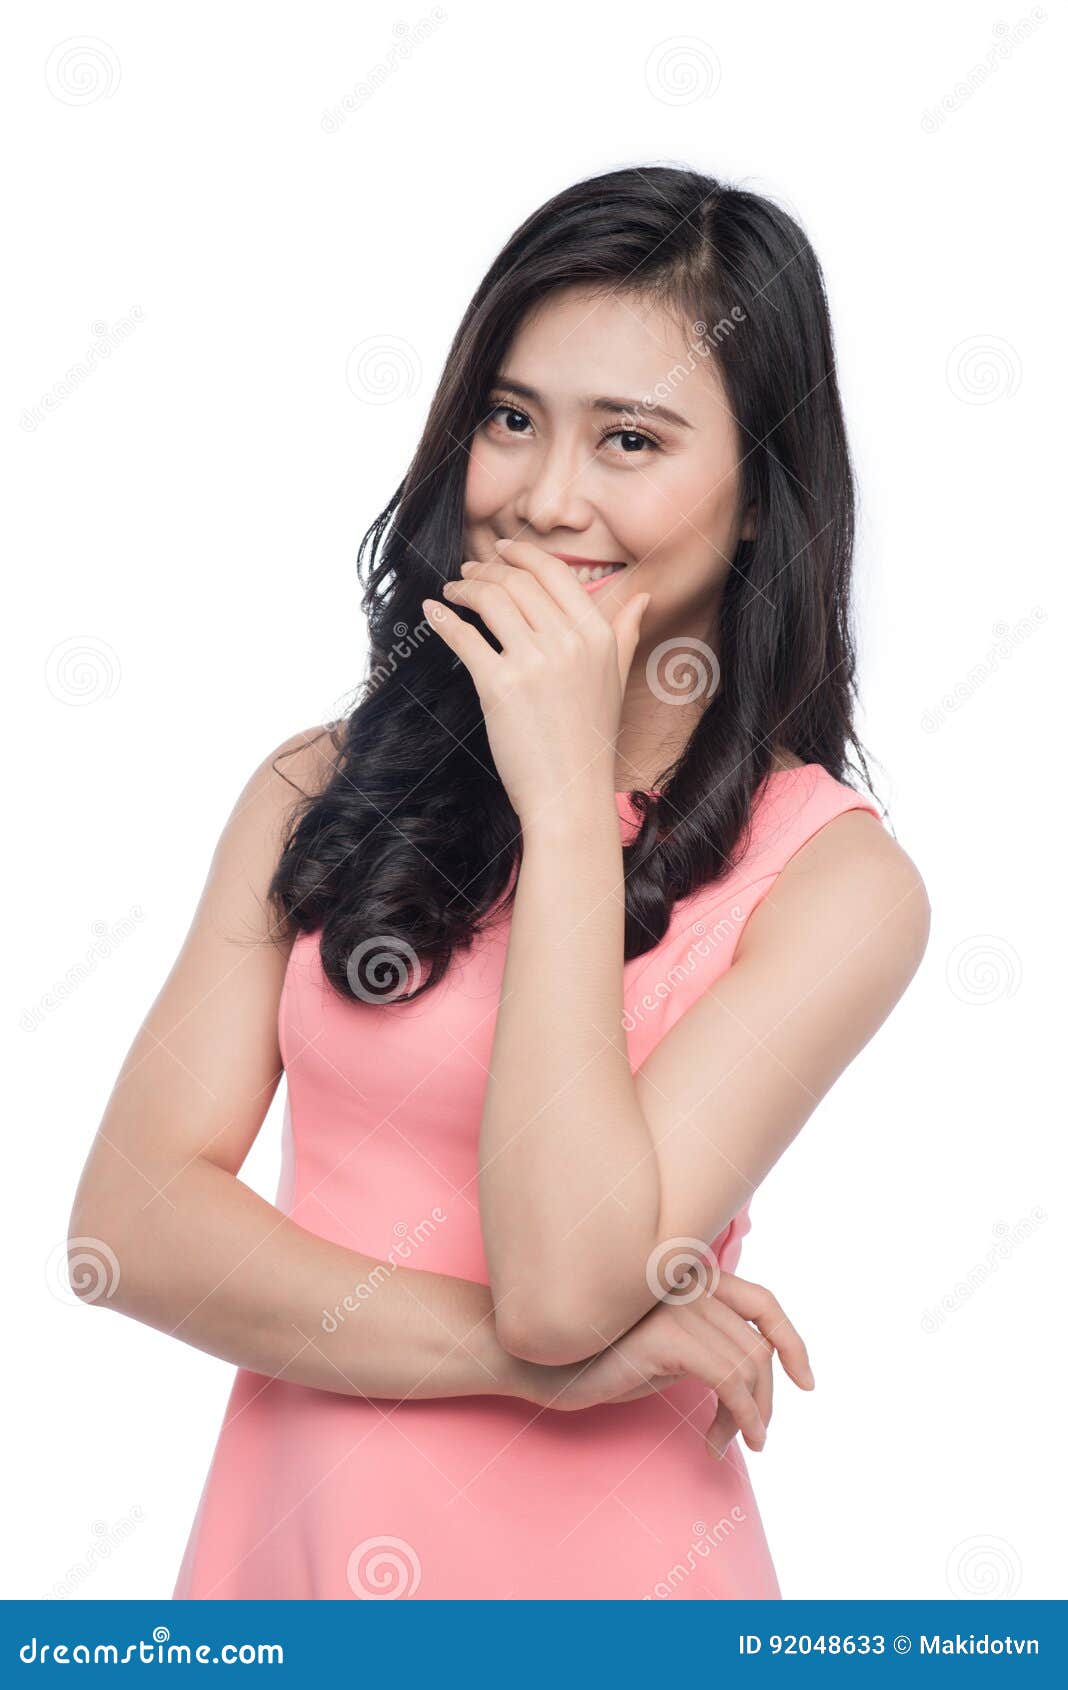 Asian Shy Girl Smiling Portrait With Hands In Face Stock Image Image 